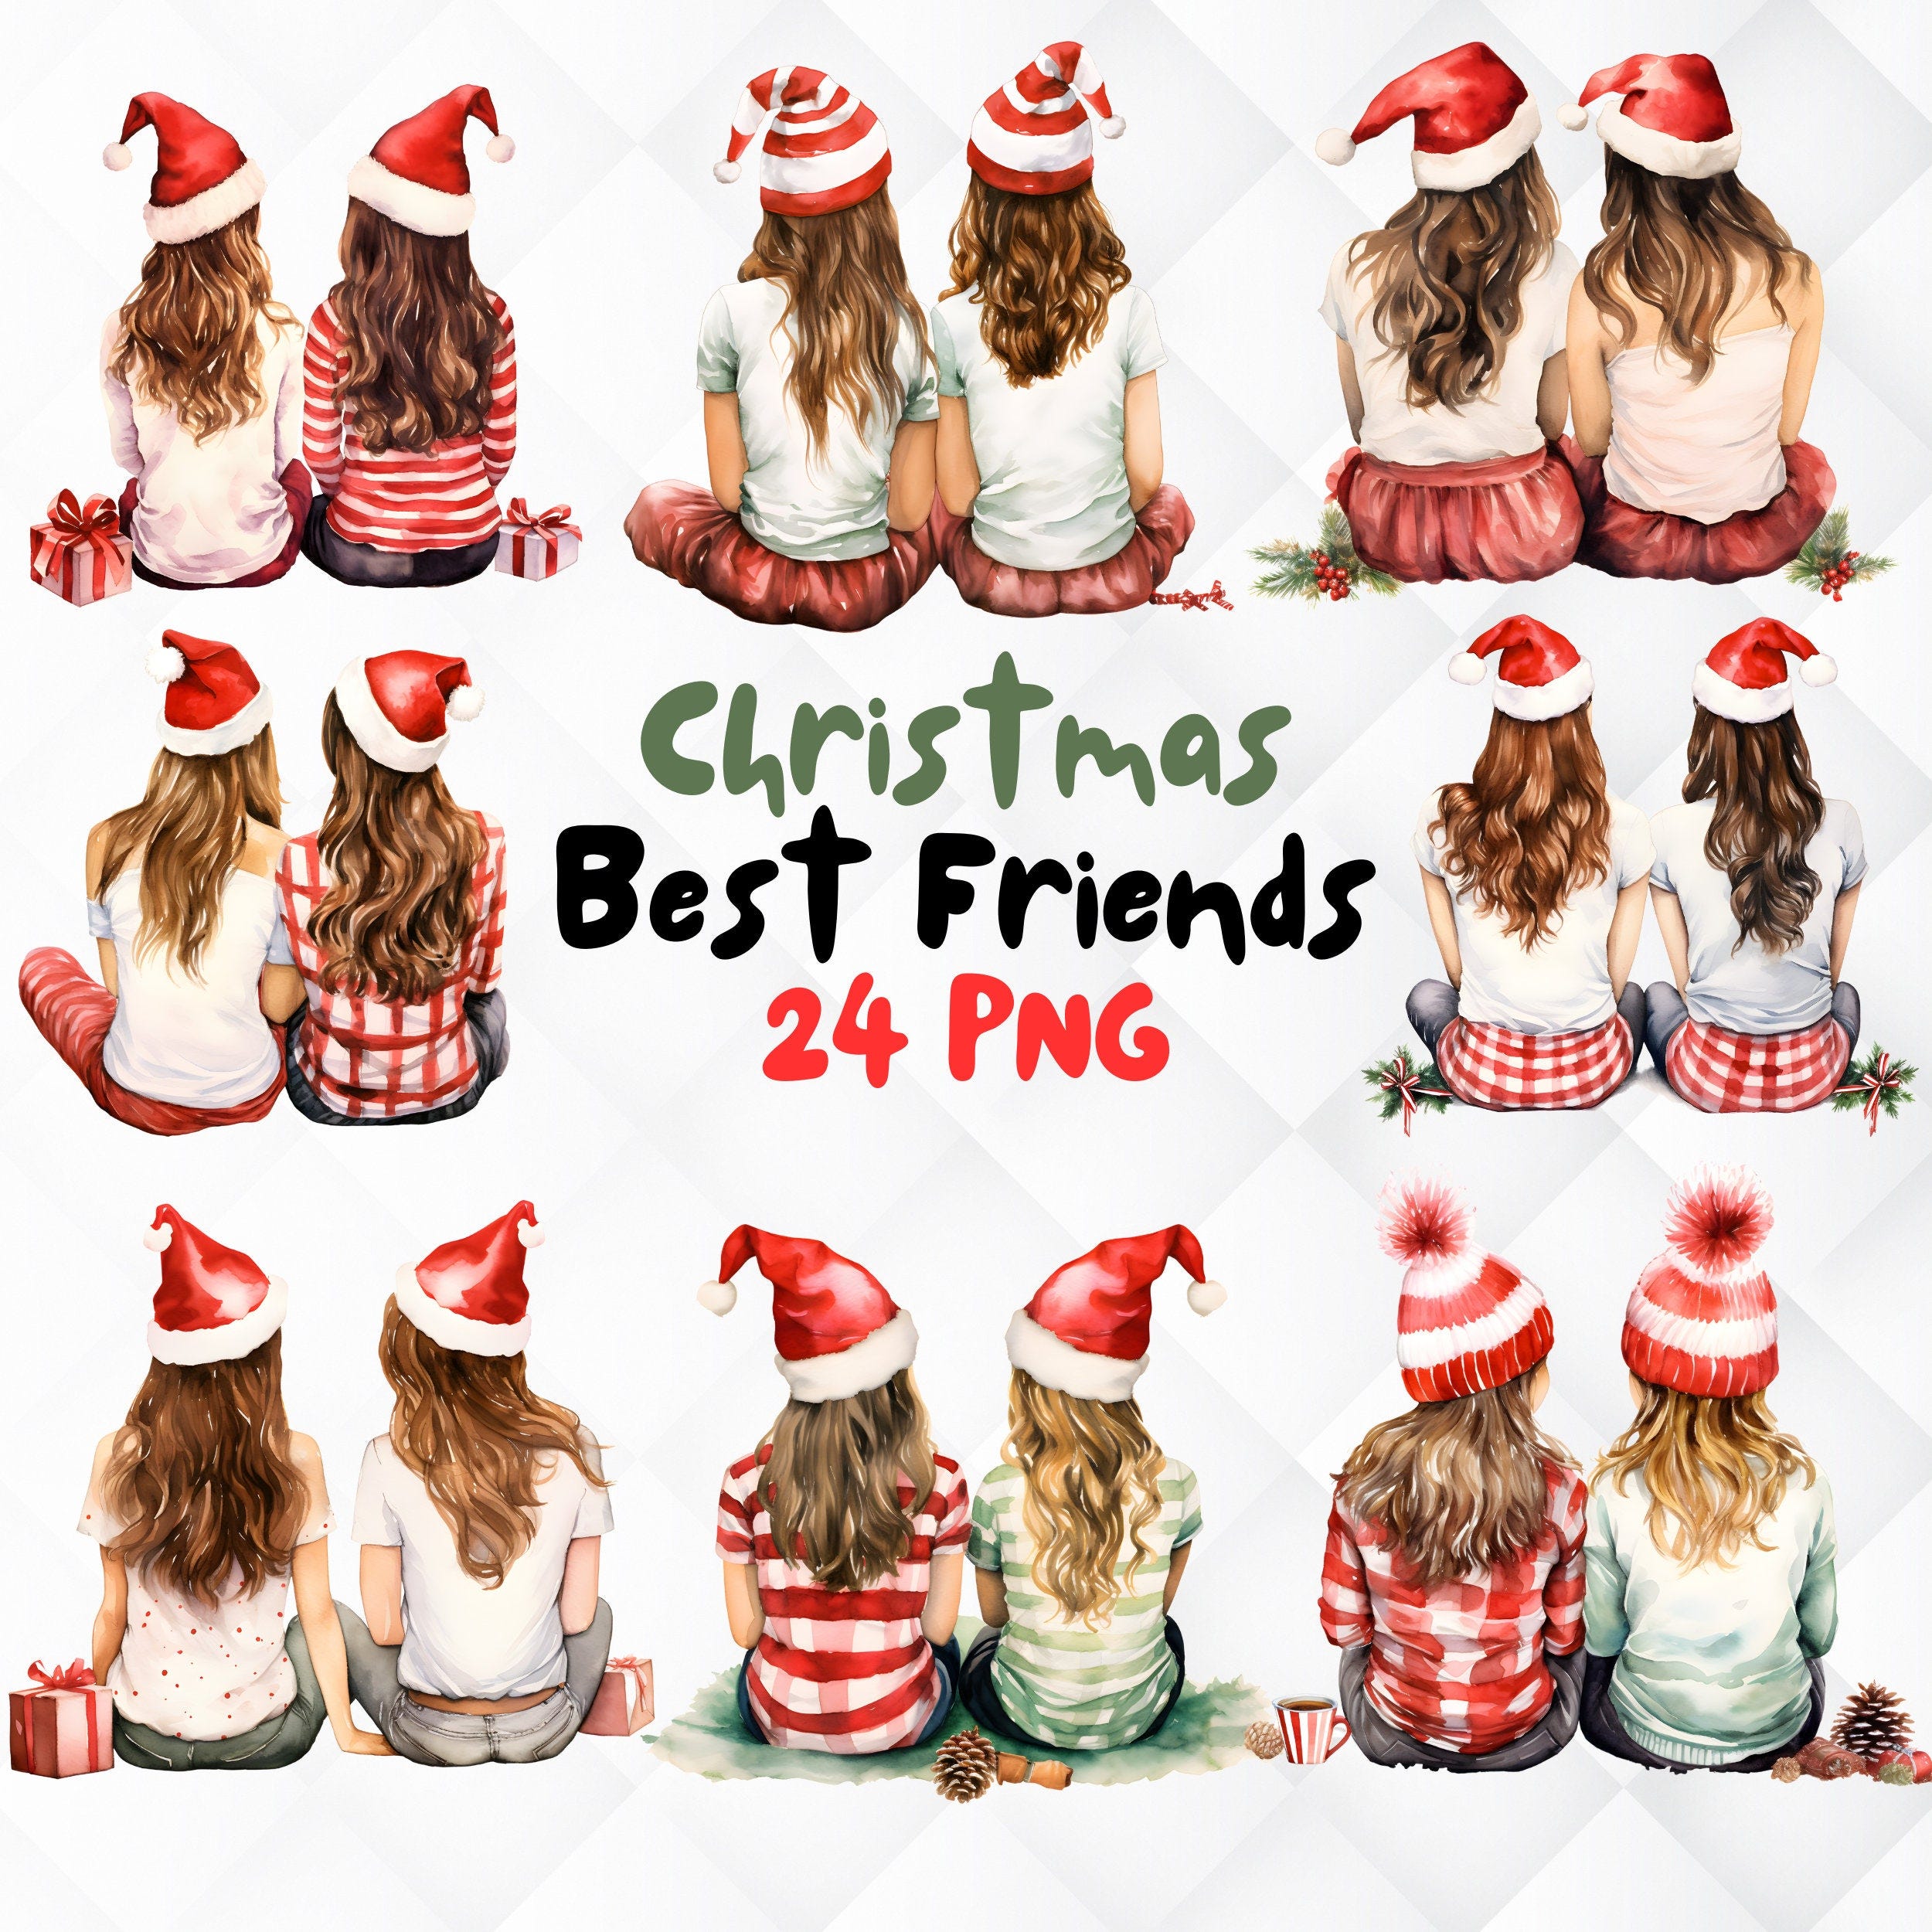 Watercolor Christmas Best Friends Clipart. 24 Christmas Besties PNG. Girl Besties Duo. Bestie girls clipart Digital Download Card Crafting